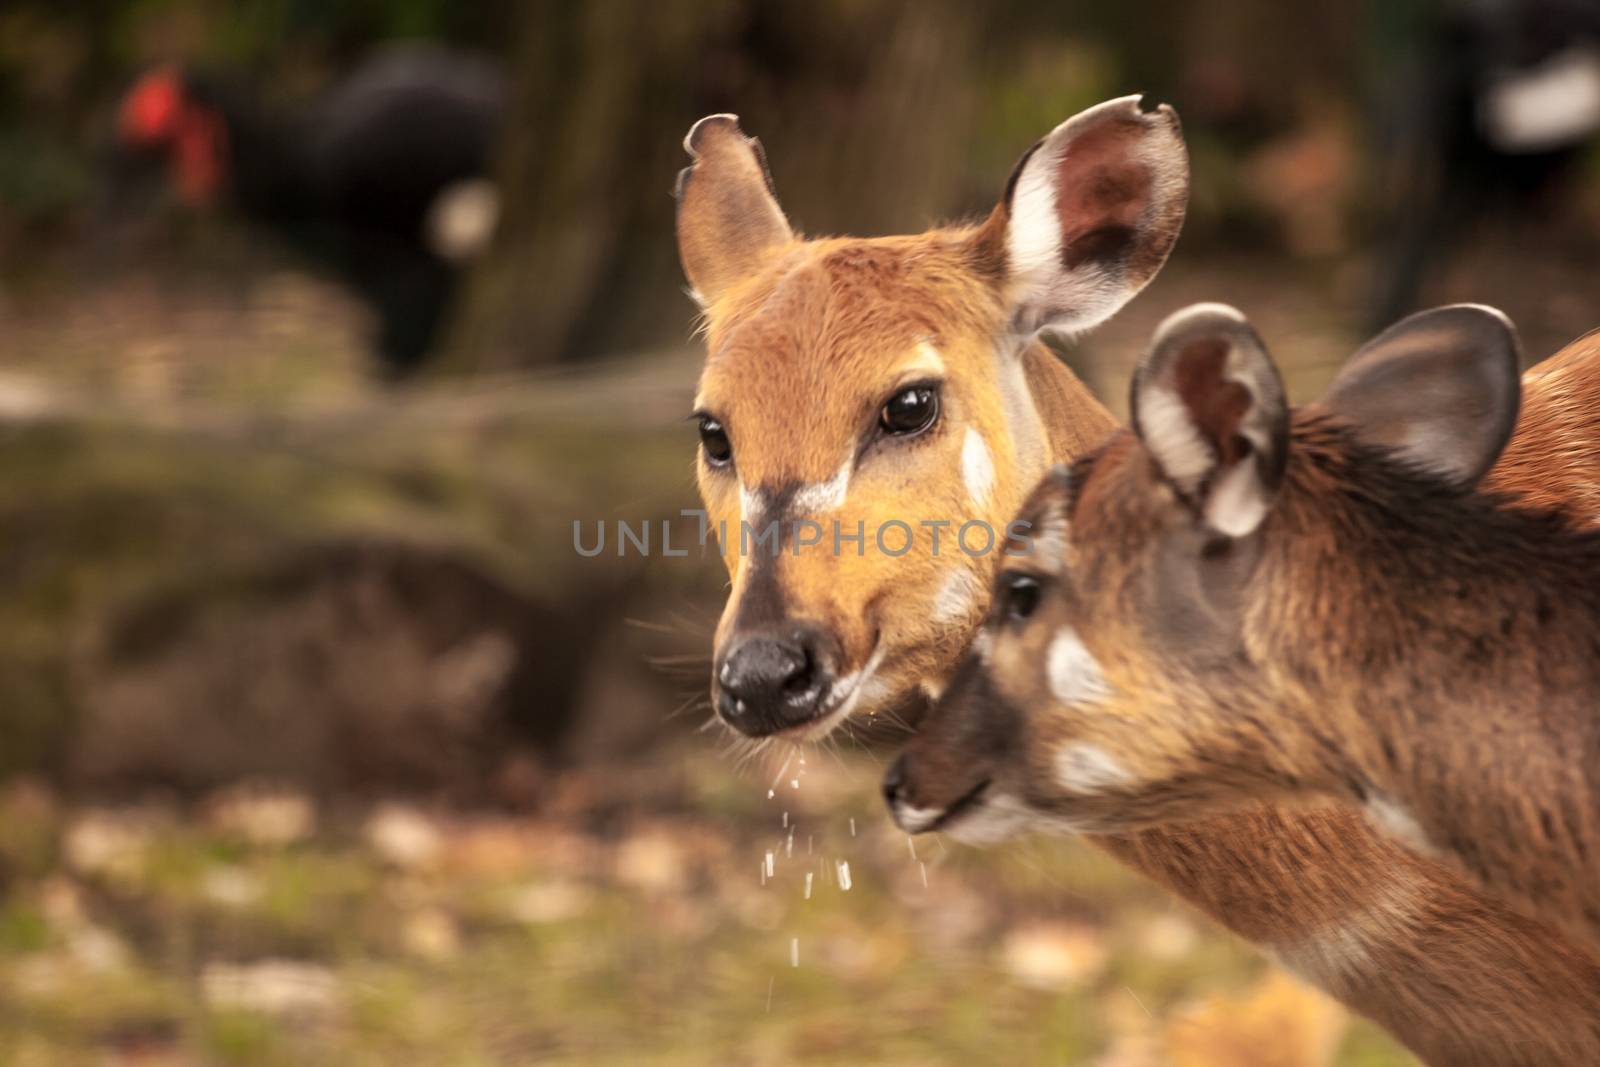 Mother's love, deer and cute fawn by Lizard